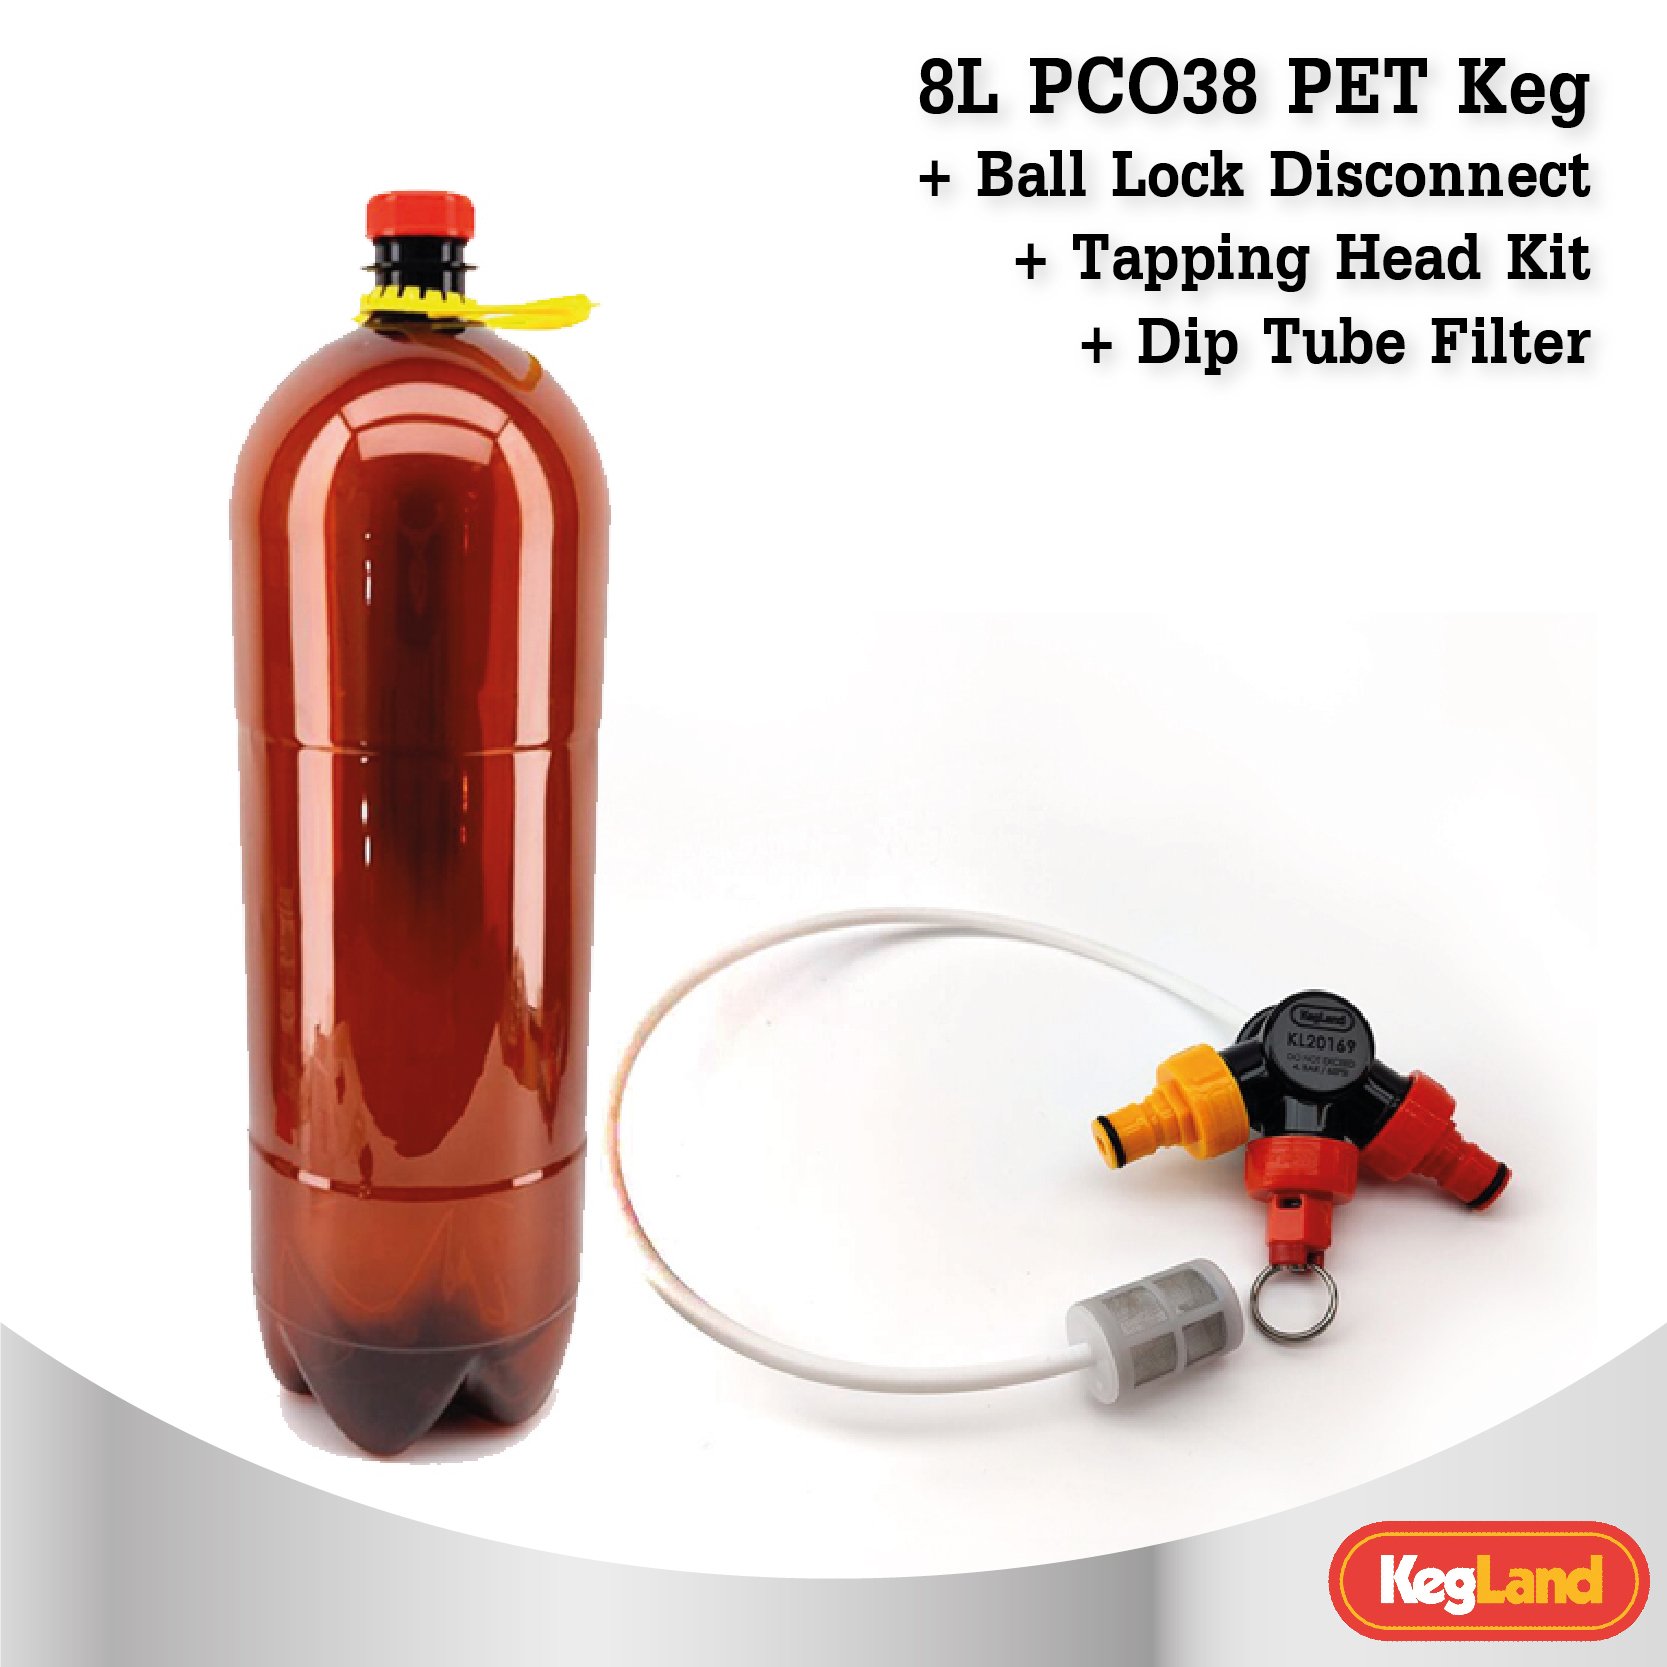 8L PCO38 PET Keg with Ball Lock Disconnect Tapping Head Kit